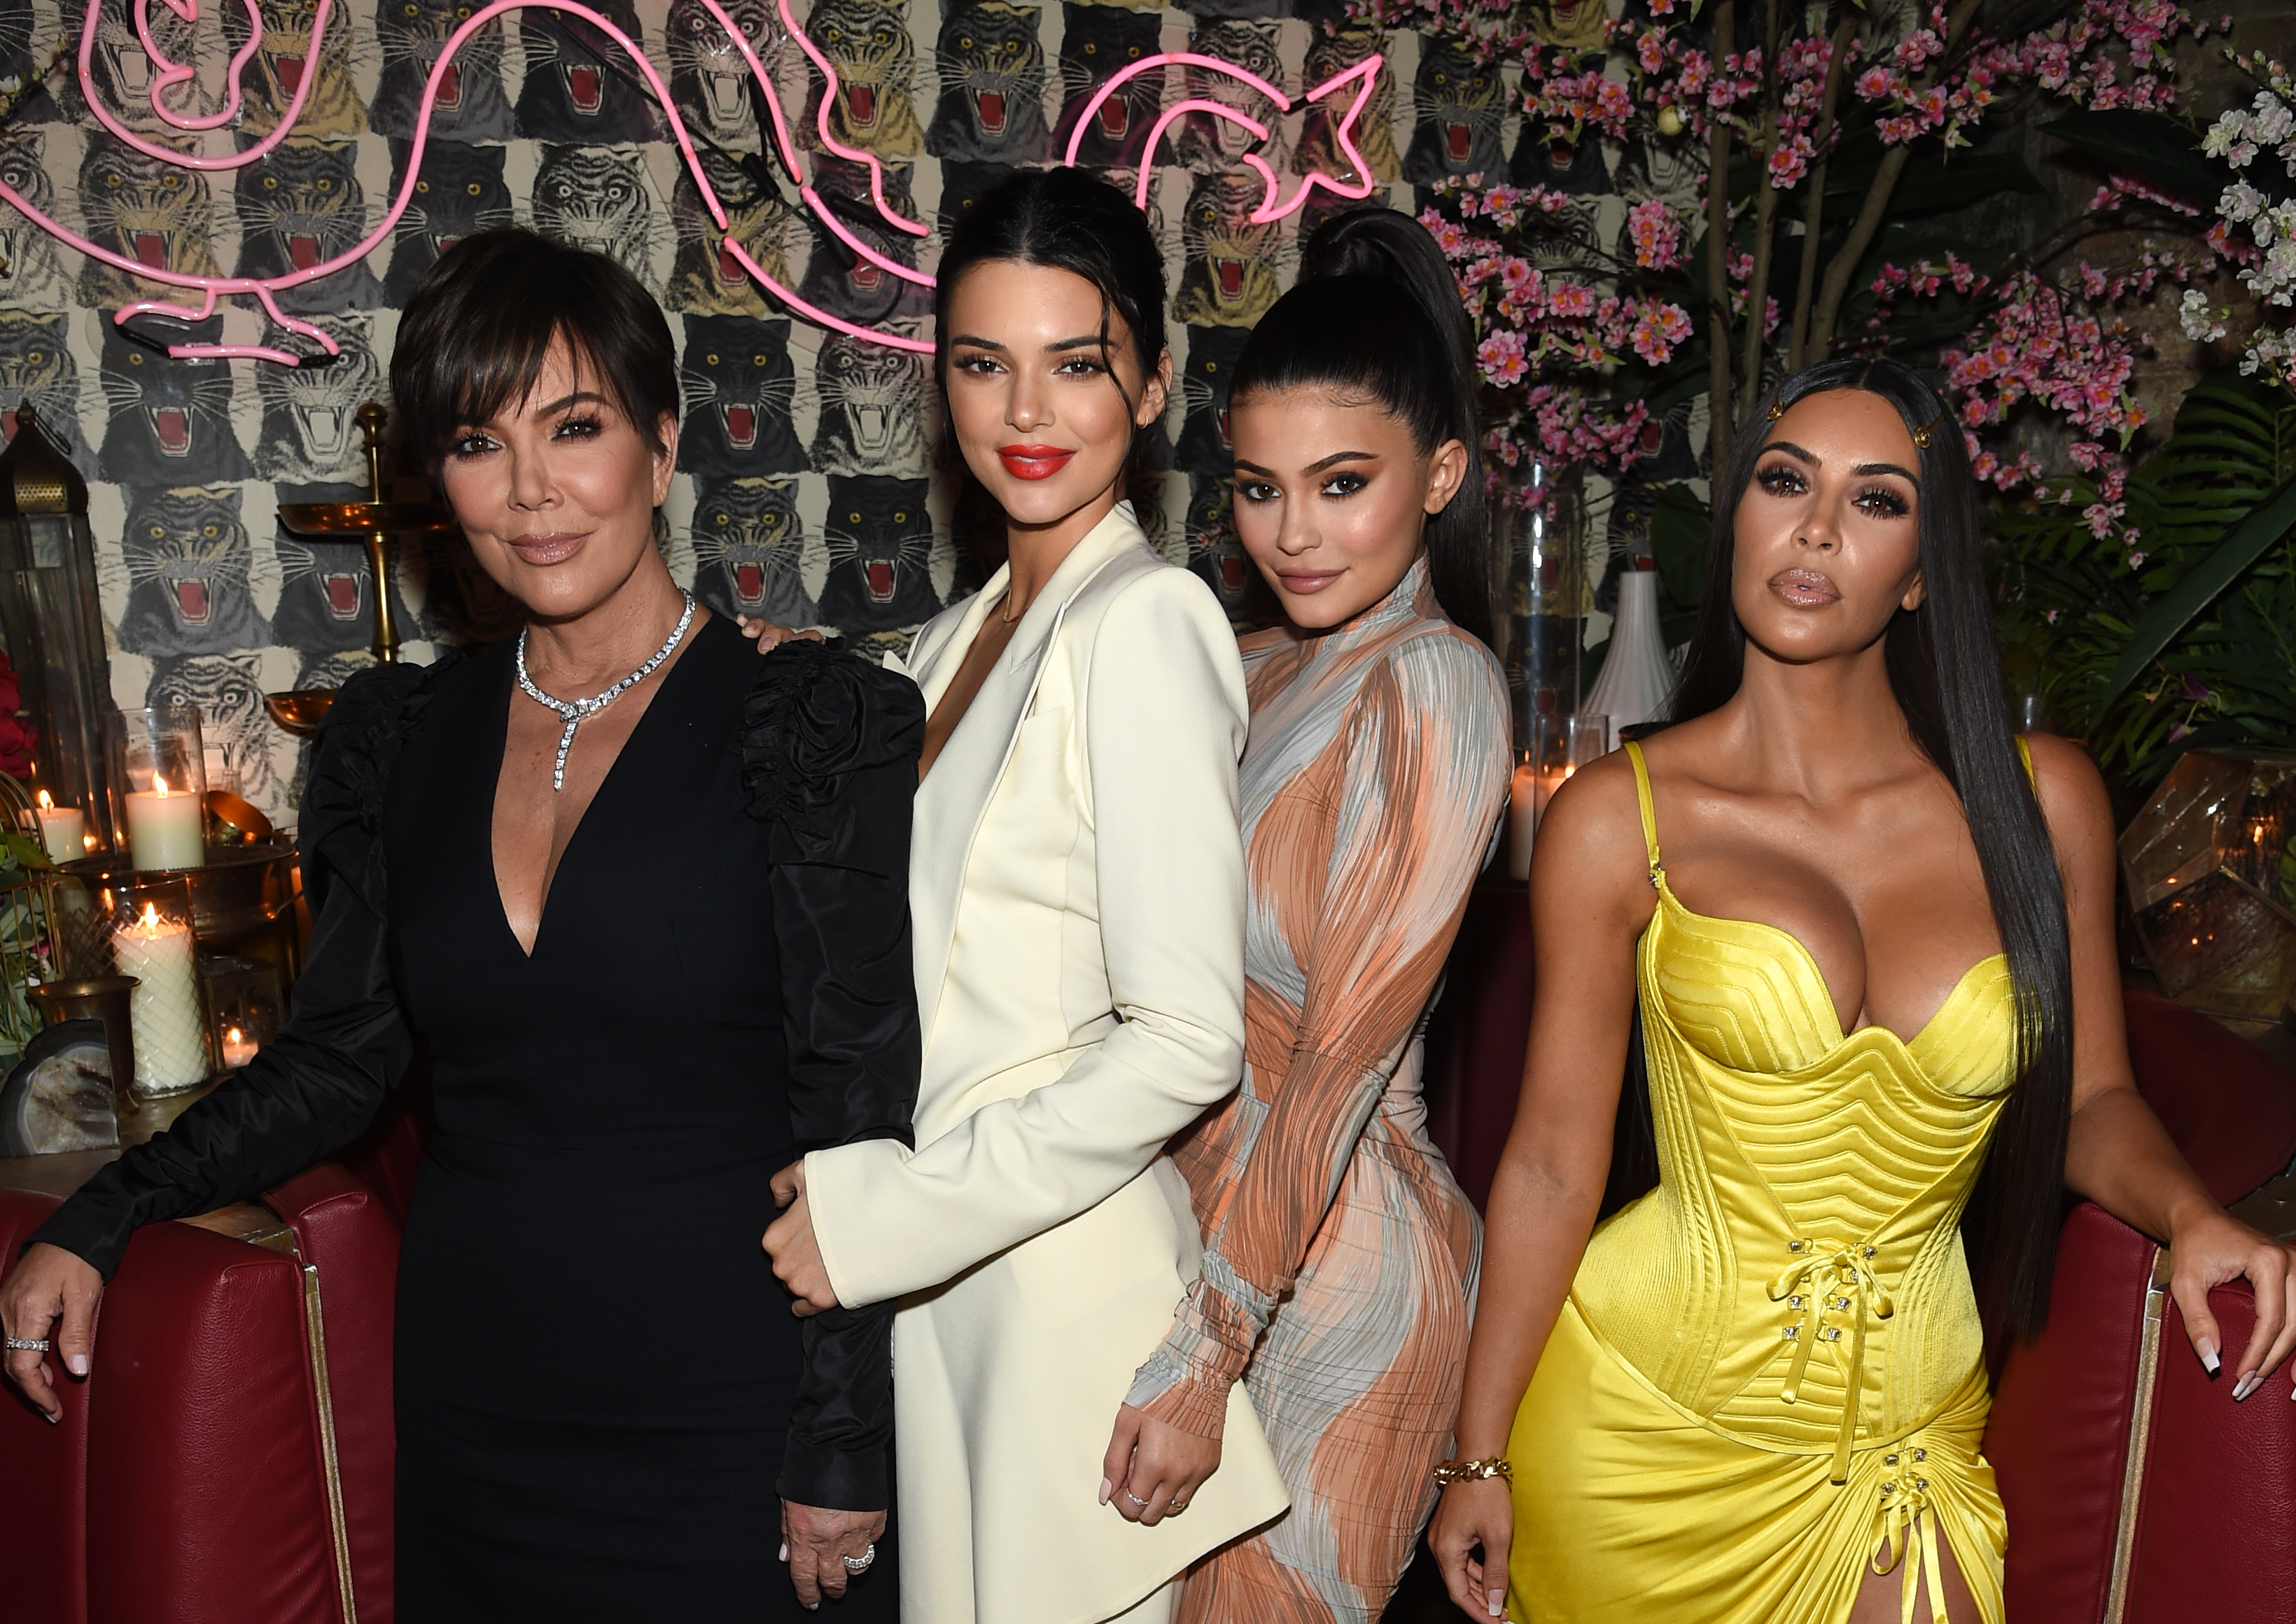 Kris Jenner, Kendall Jenner, Kylie Jenner, and Kim Kardashian West posing and hugging at an event.